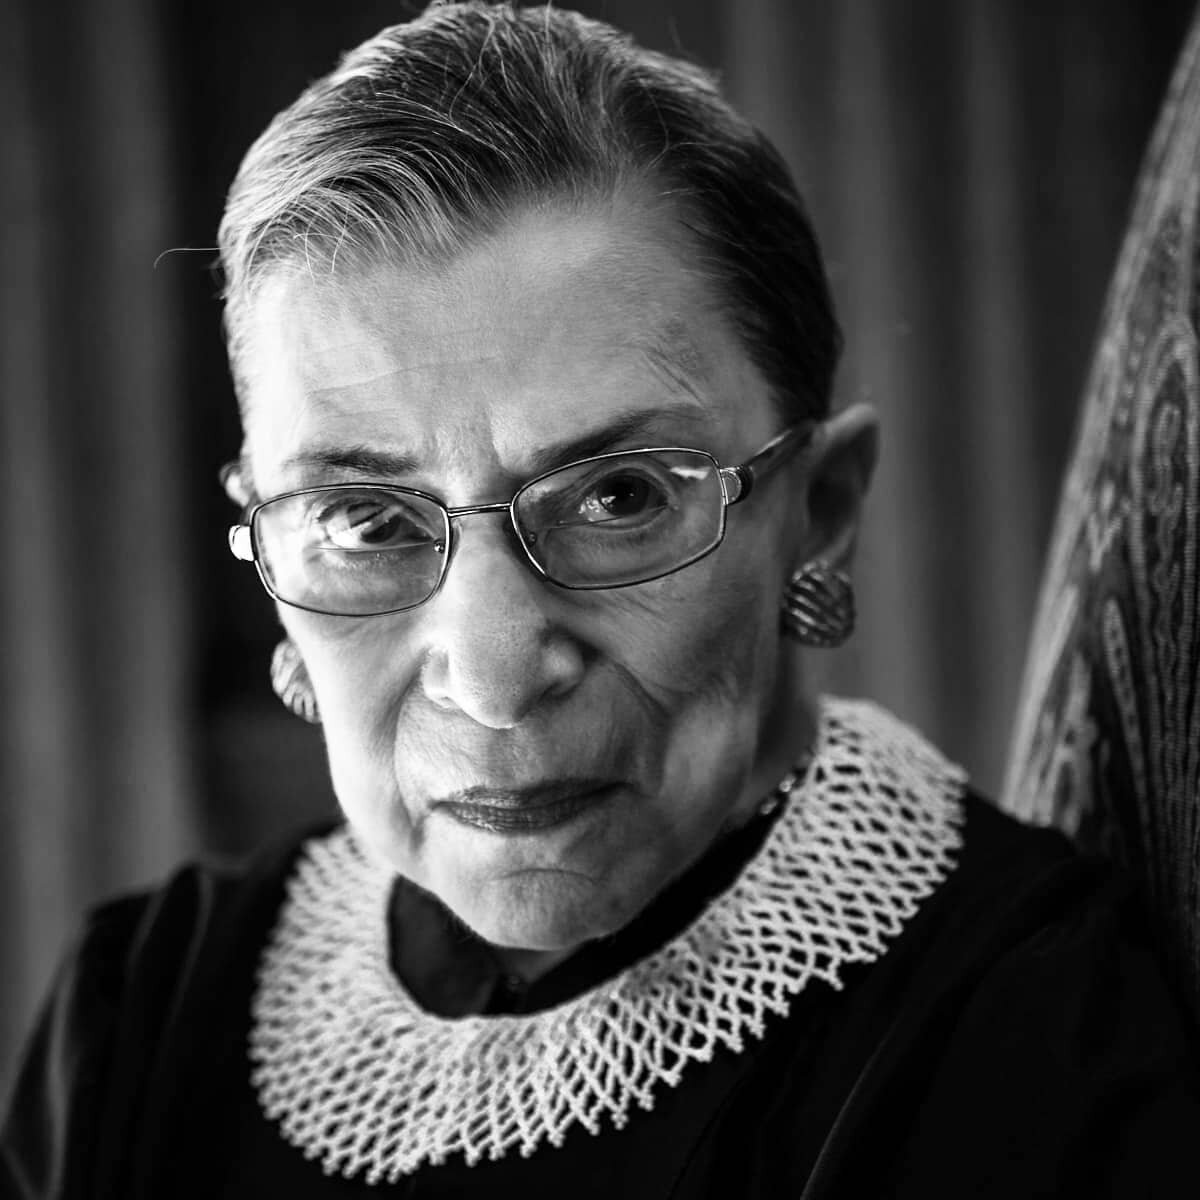 &quot;Fight for the things that you care about, but do it in a way that will lead others to join you.&quot;

-RBG

It's been a privilege to share our earth with this incredible woman, and I stand alongside all those devastated by her passing.

Let's 